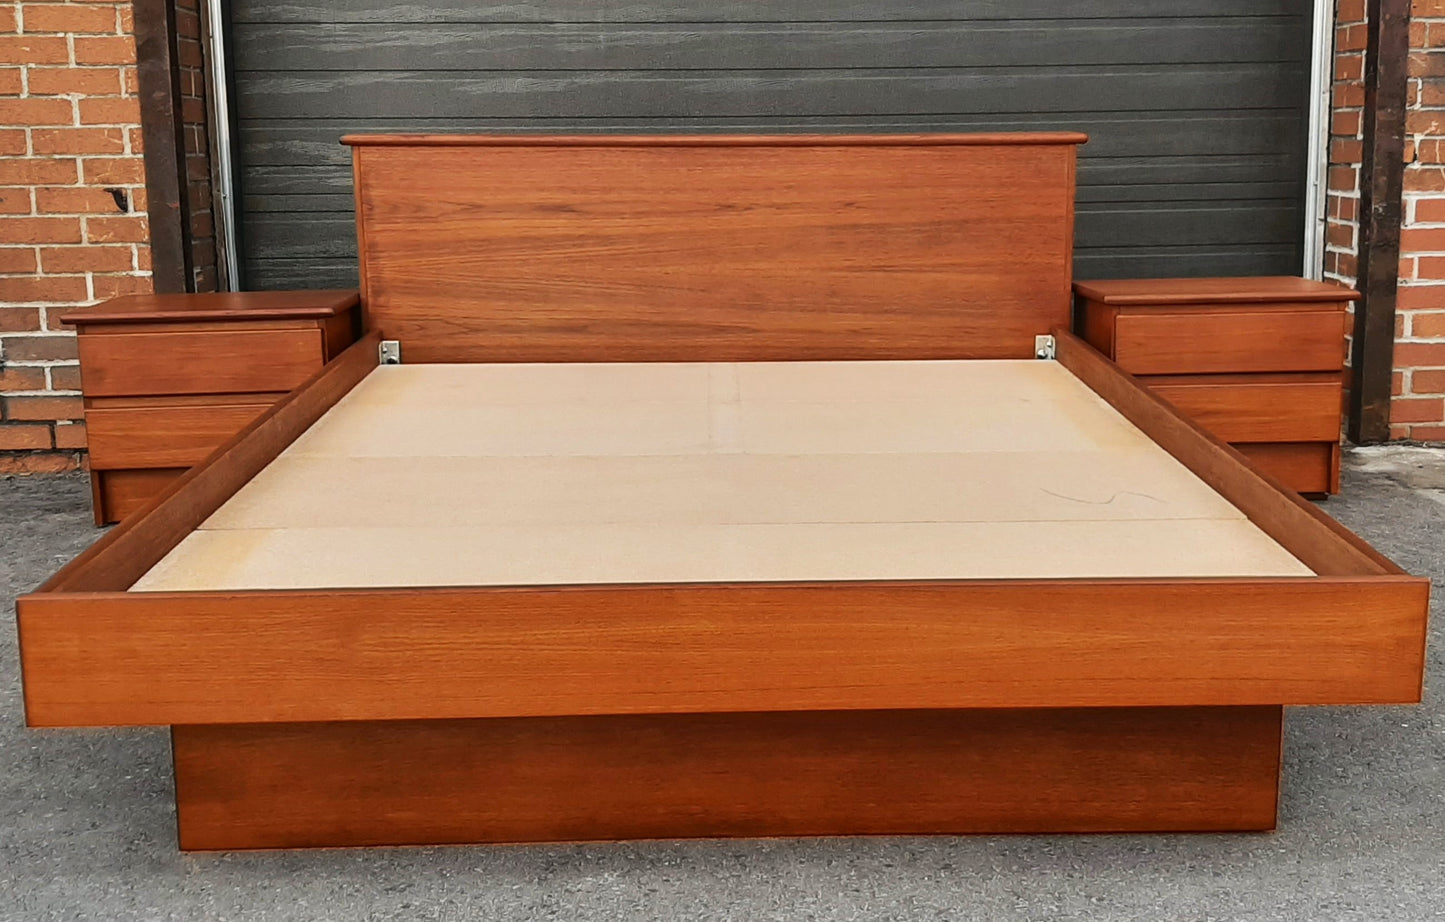 REFINISHED MCM Teak Bed Queen with 2 separate night stands by Mobican, PERFECT